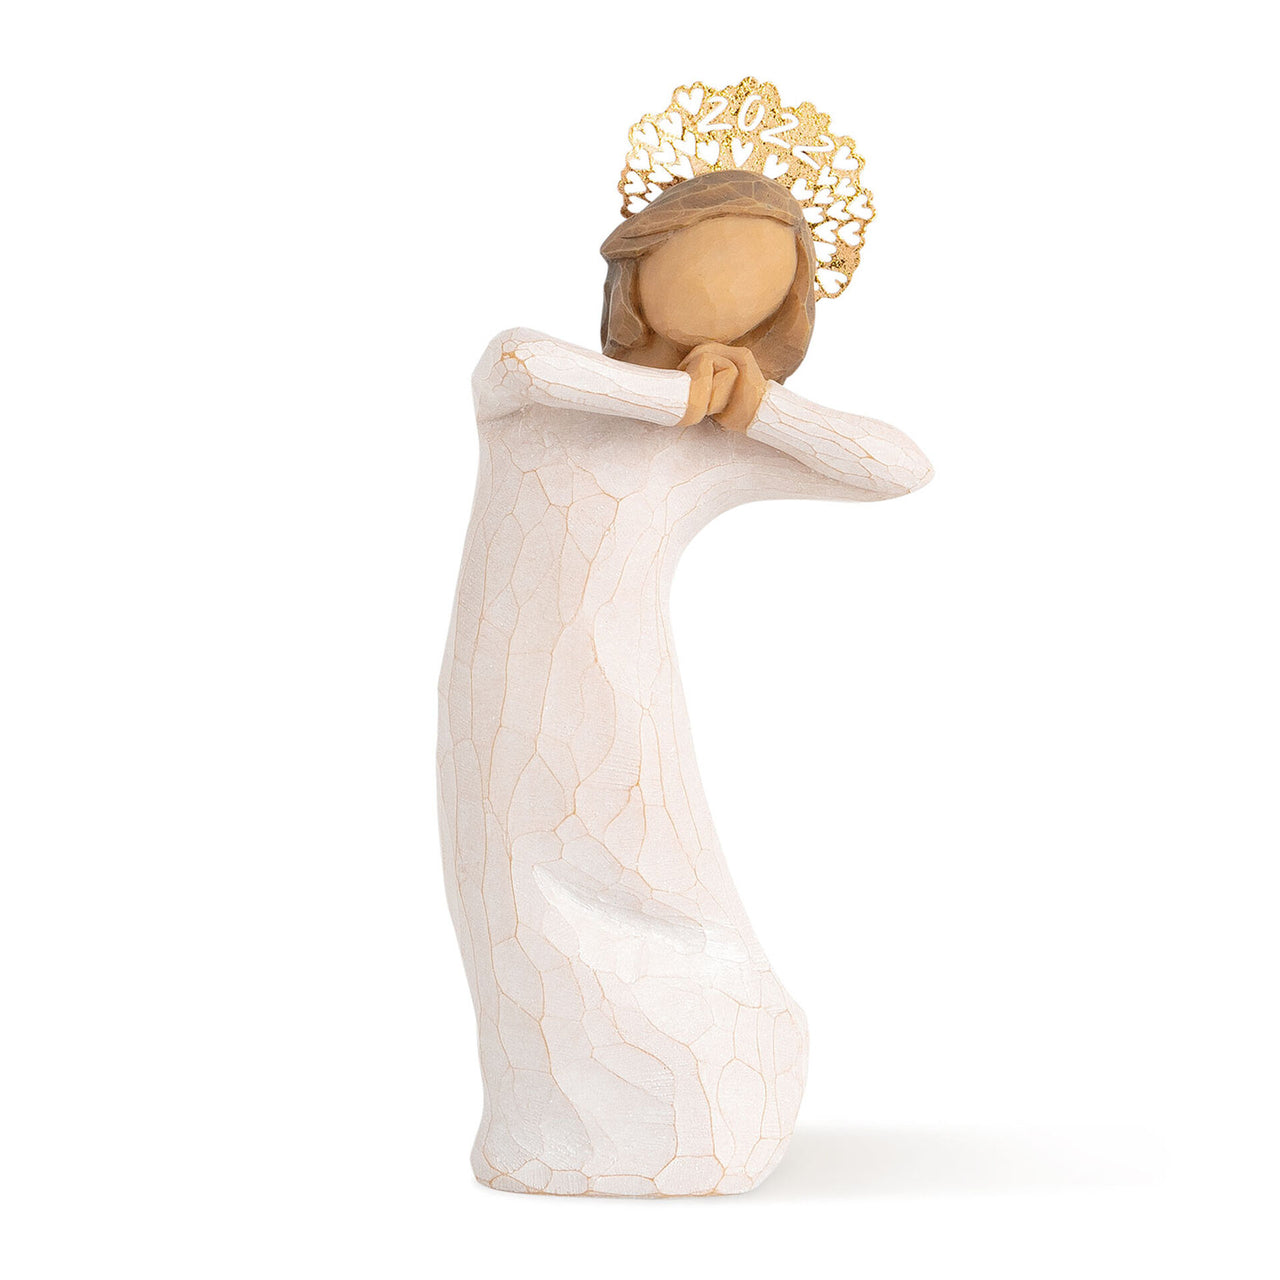 2022 Dated Willow Tree® Figure CELEBRATE Sculpted by Susan Lordi